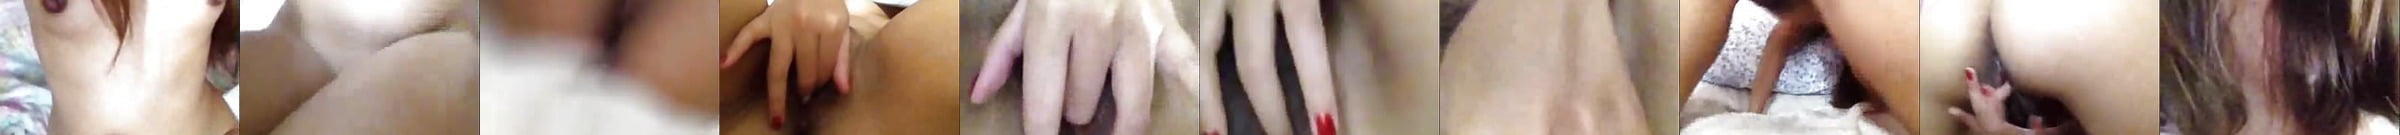 Hairy Filipino Pussy Free We Are Hairy Free Porn Video 16 Xhamster